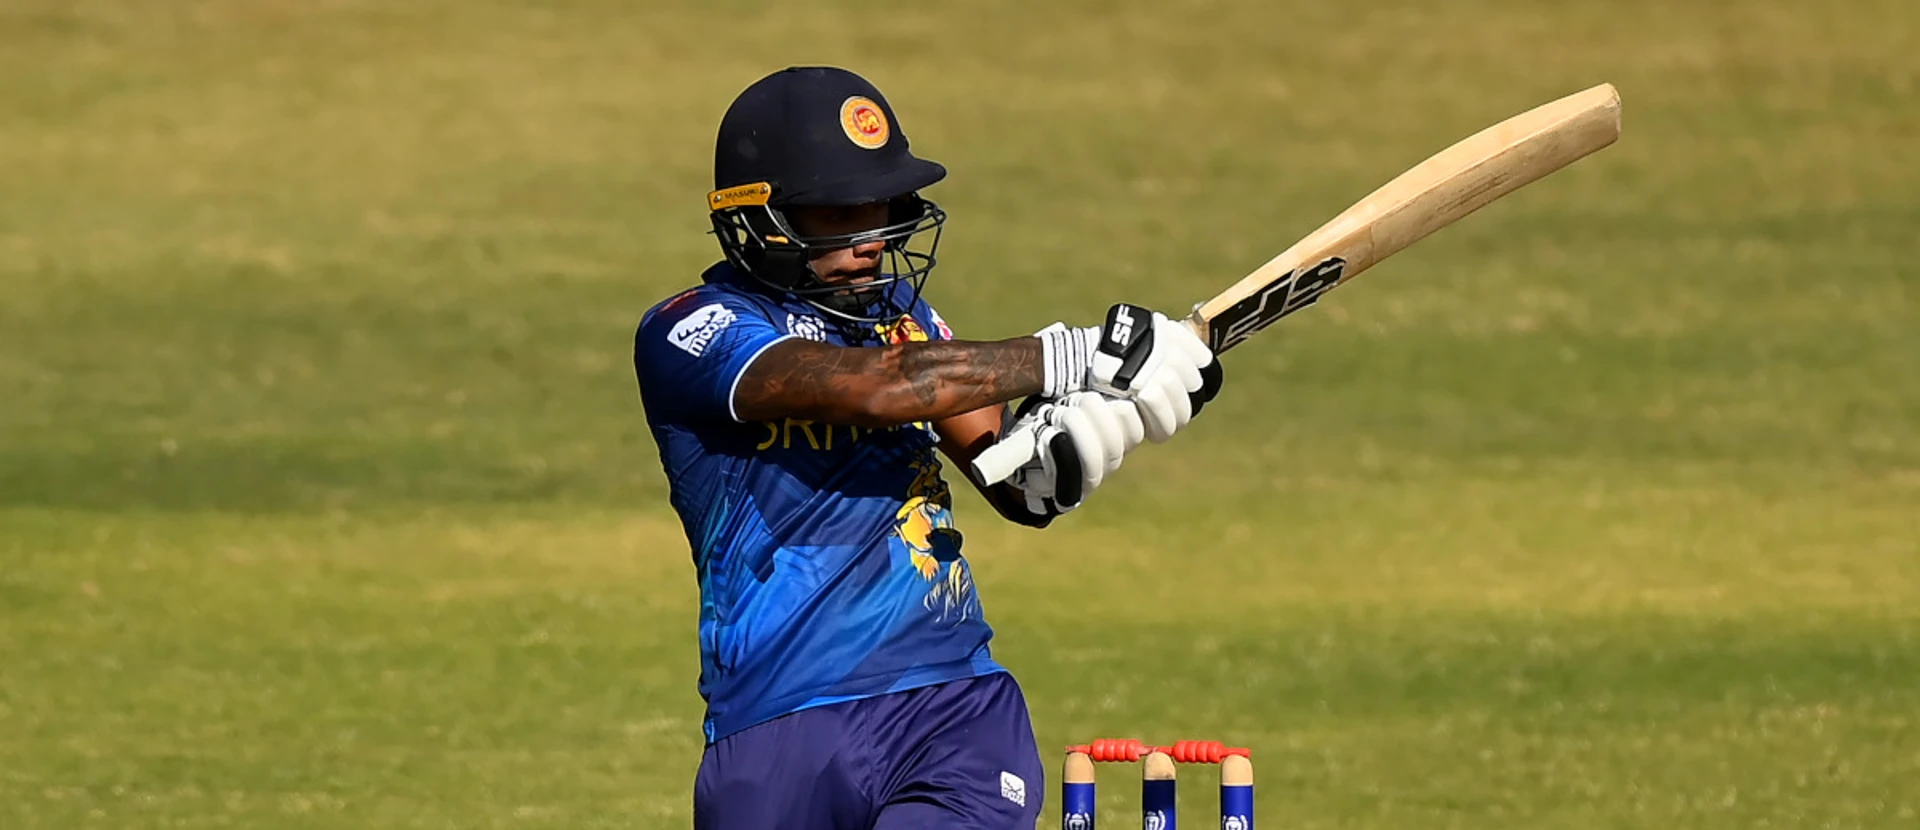 Sri Lanka see off sorry West Indies in qualifier dead rubber